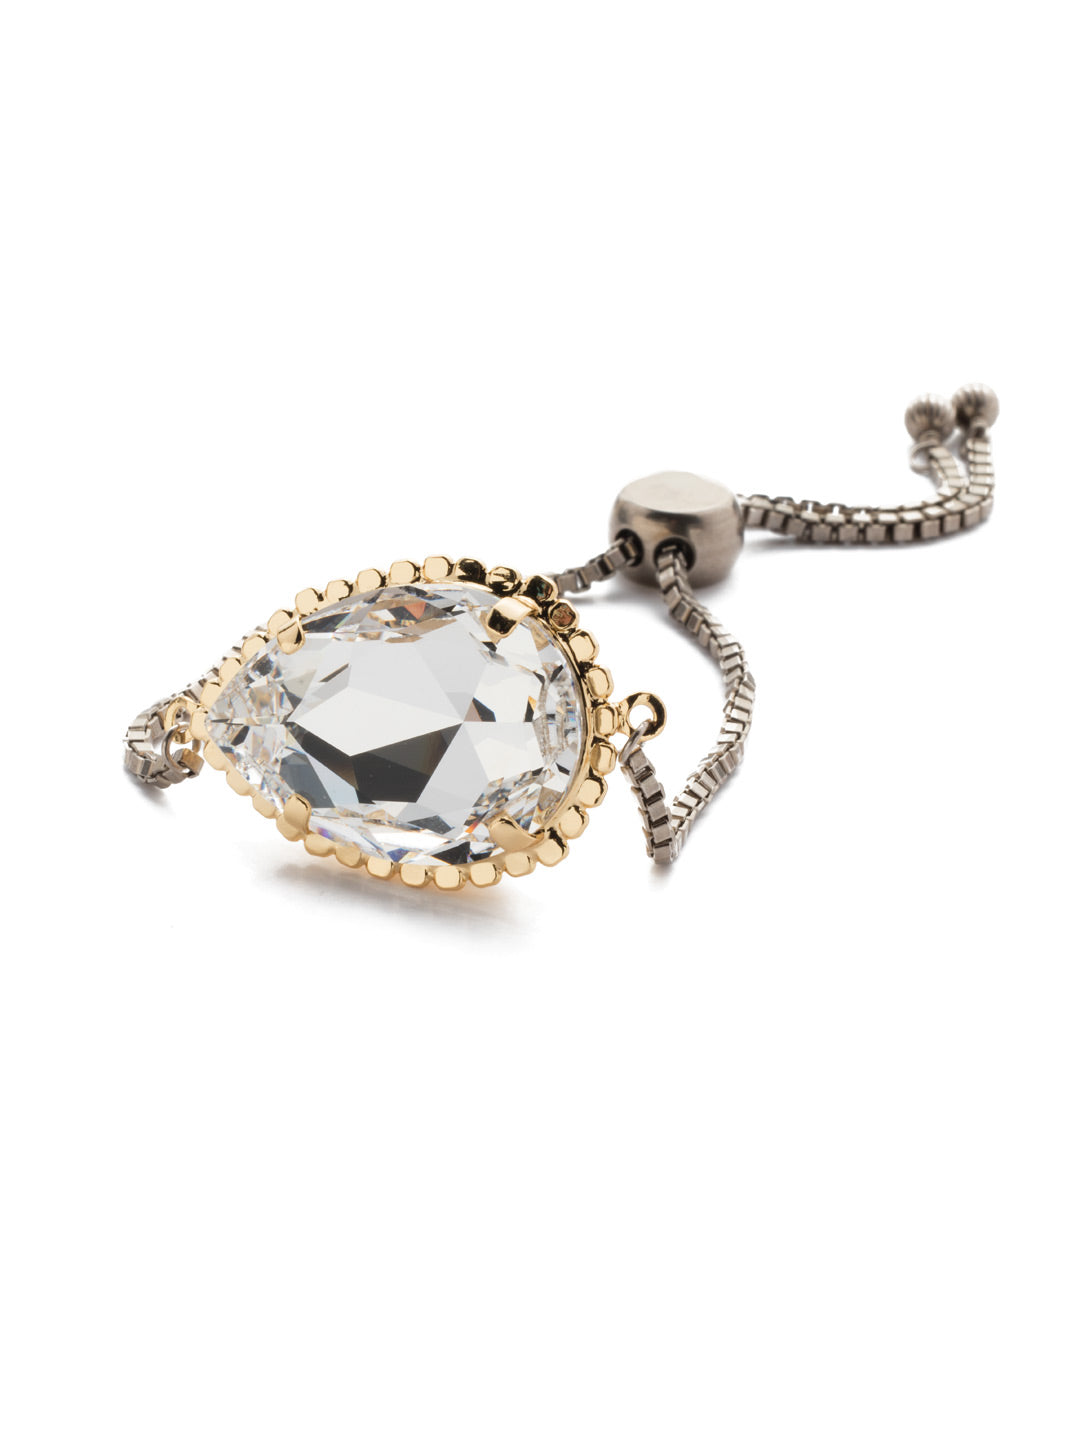 Agatha Slider Bracelet - 4BEP33MXCRY - <p>Stun when you slip the Agatha Slider Bracelet onto your wrist. The statement pear crystal is supported by fashionable metal detail. From Sorrelli's Crystal collection in our Mixed Metal finish.</p>